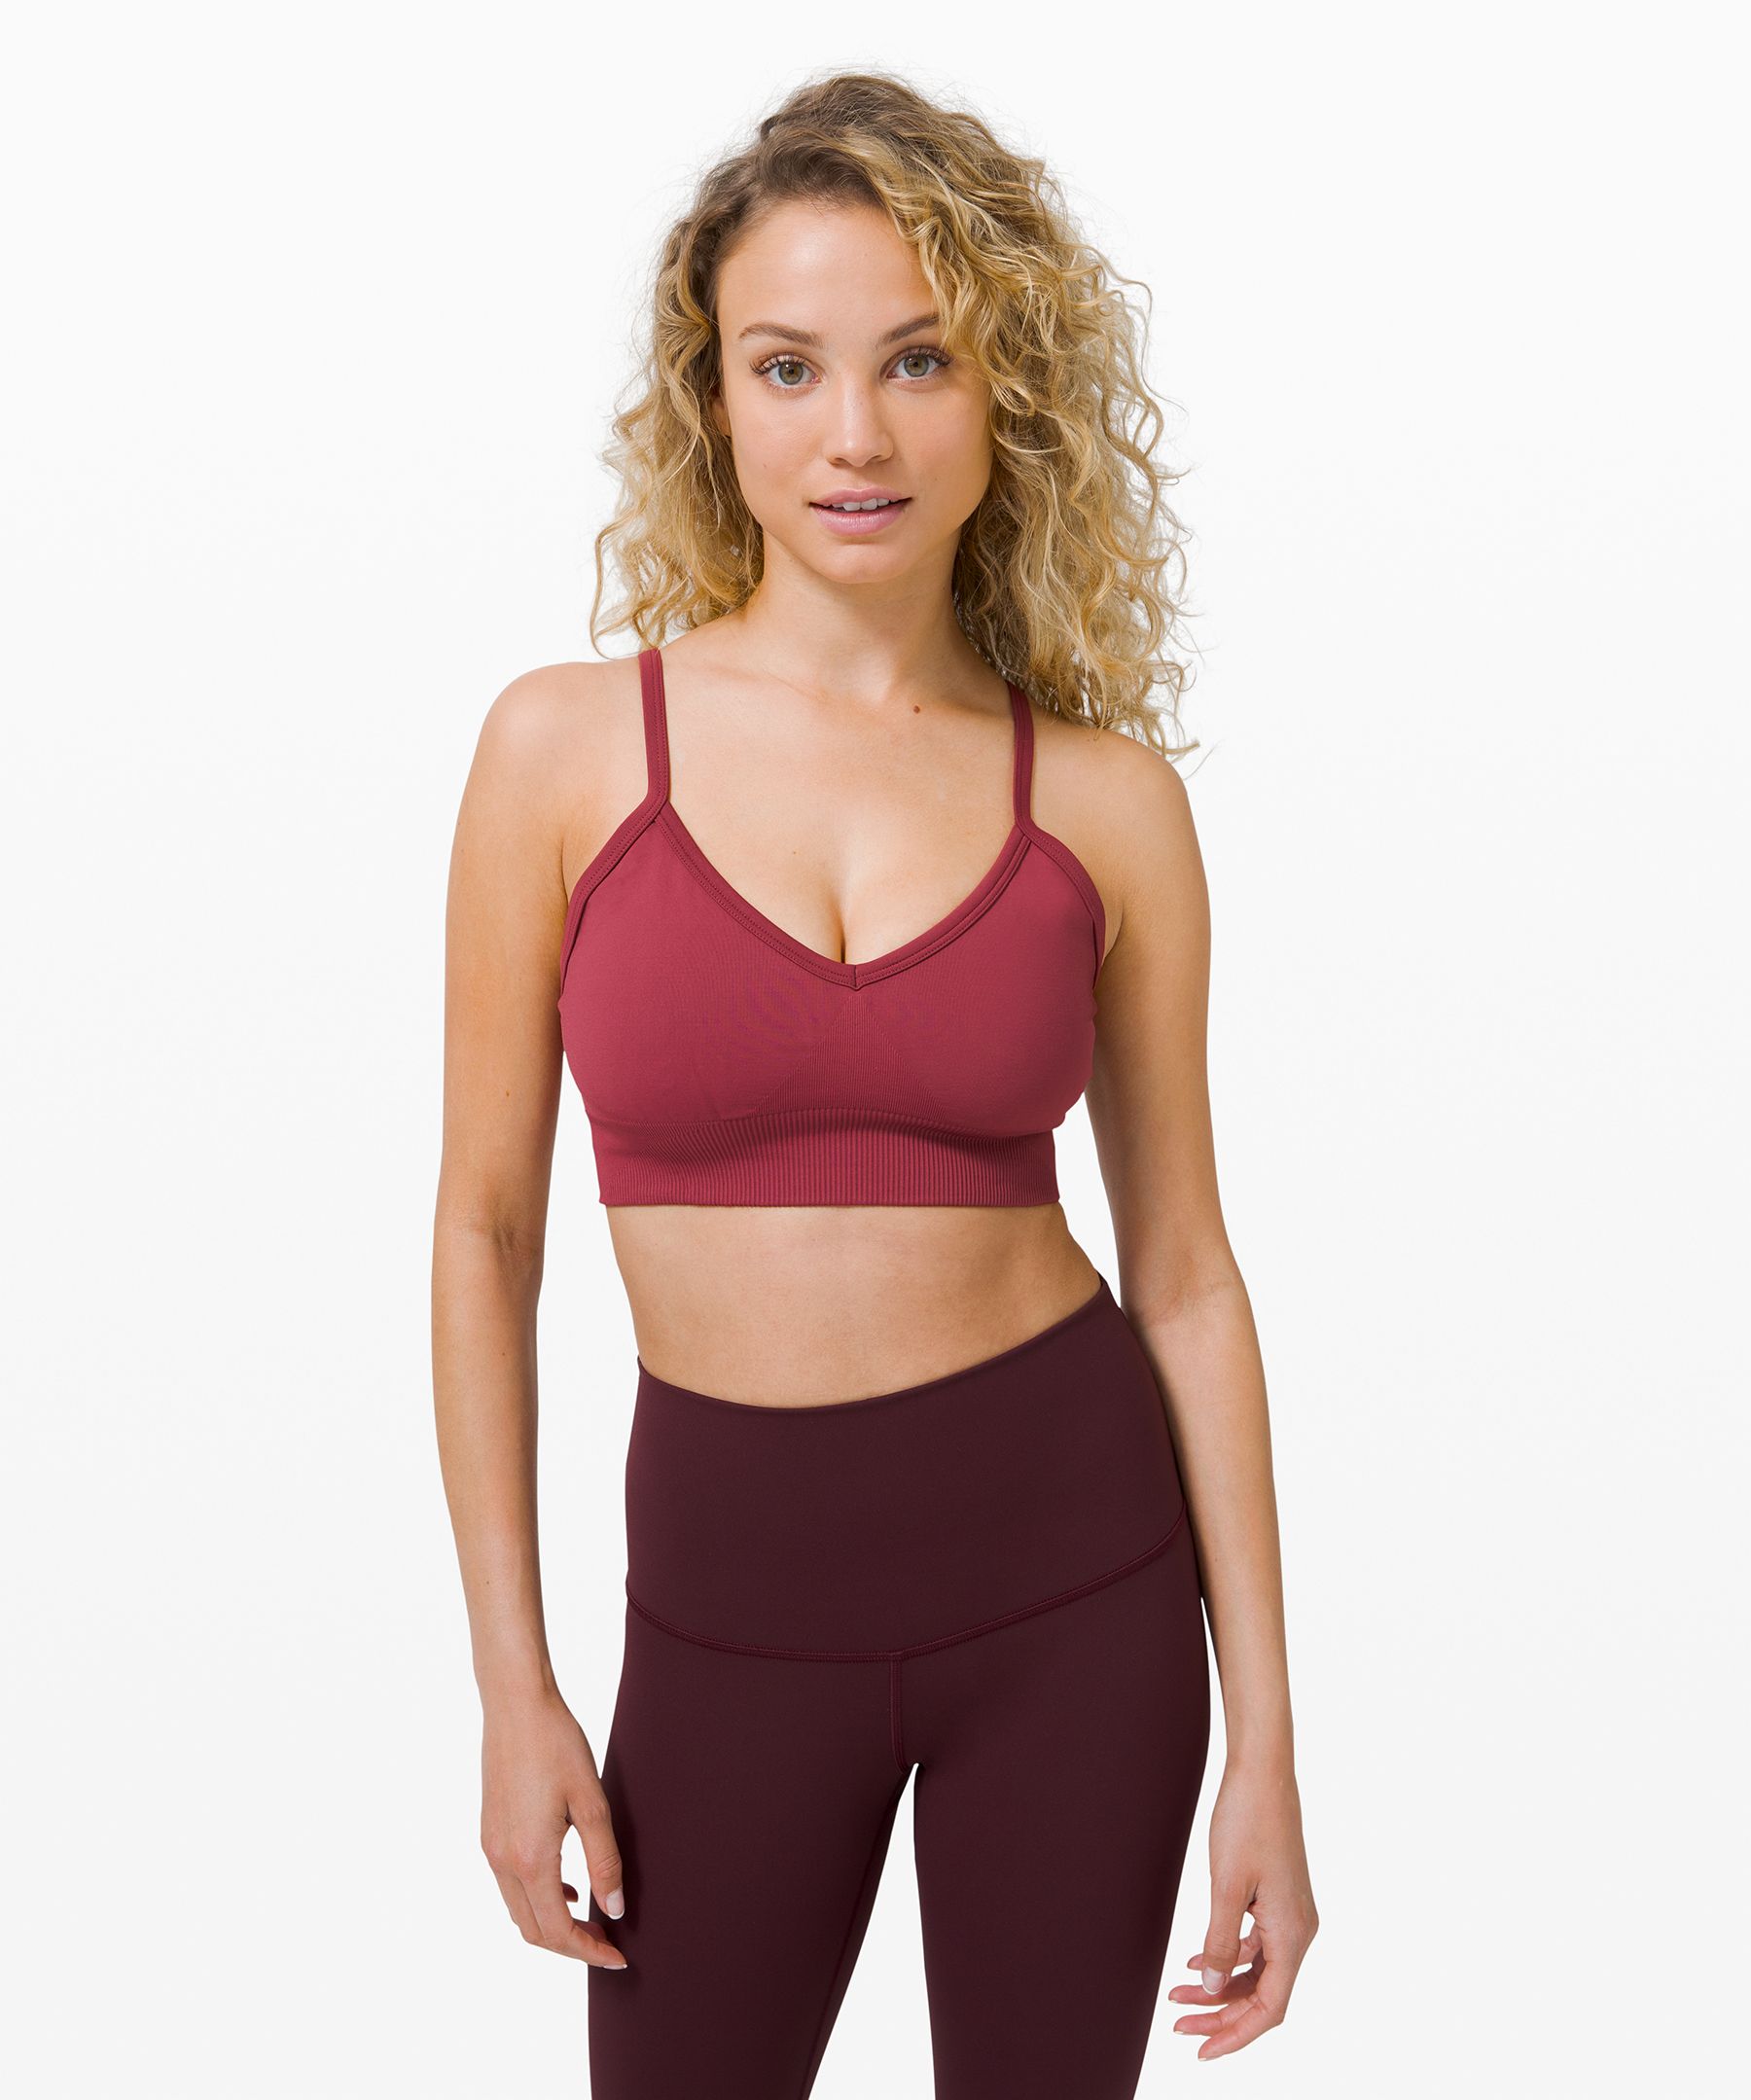 Can you please tell me the name of this Lululemon model? - MODEL ID [help]  - Bellazon